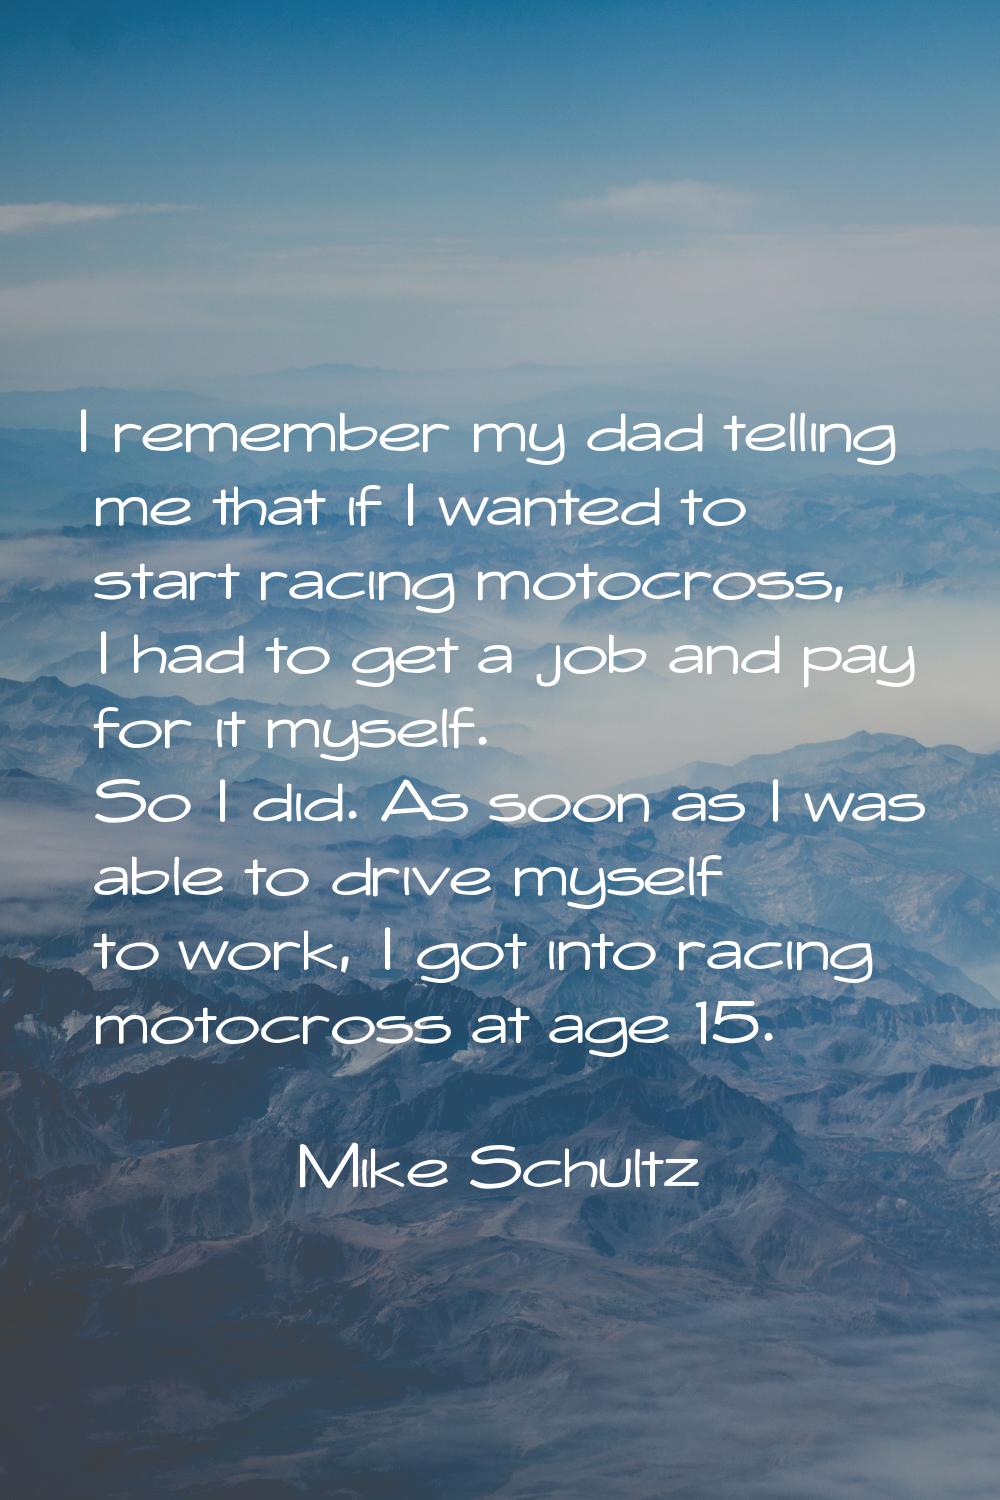 I remember my dad telling me that if I wanted to start racing motocross, I had to get a job and pay